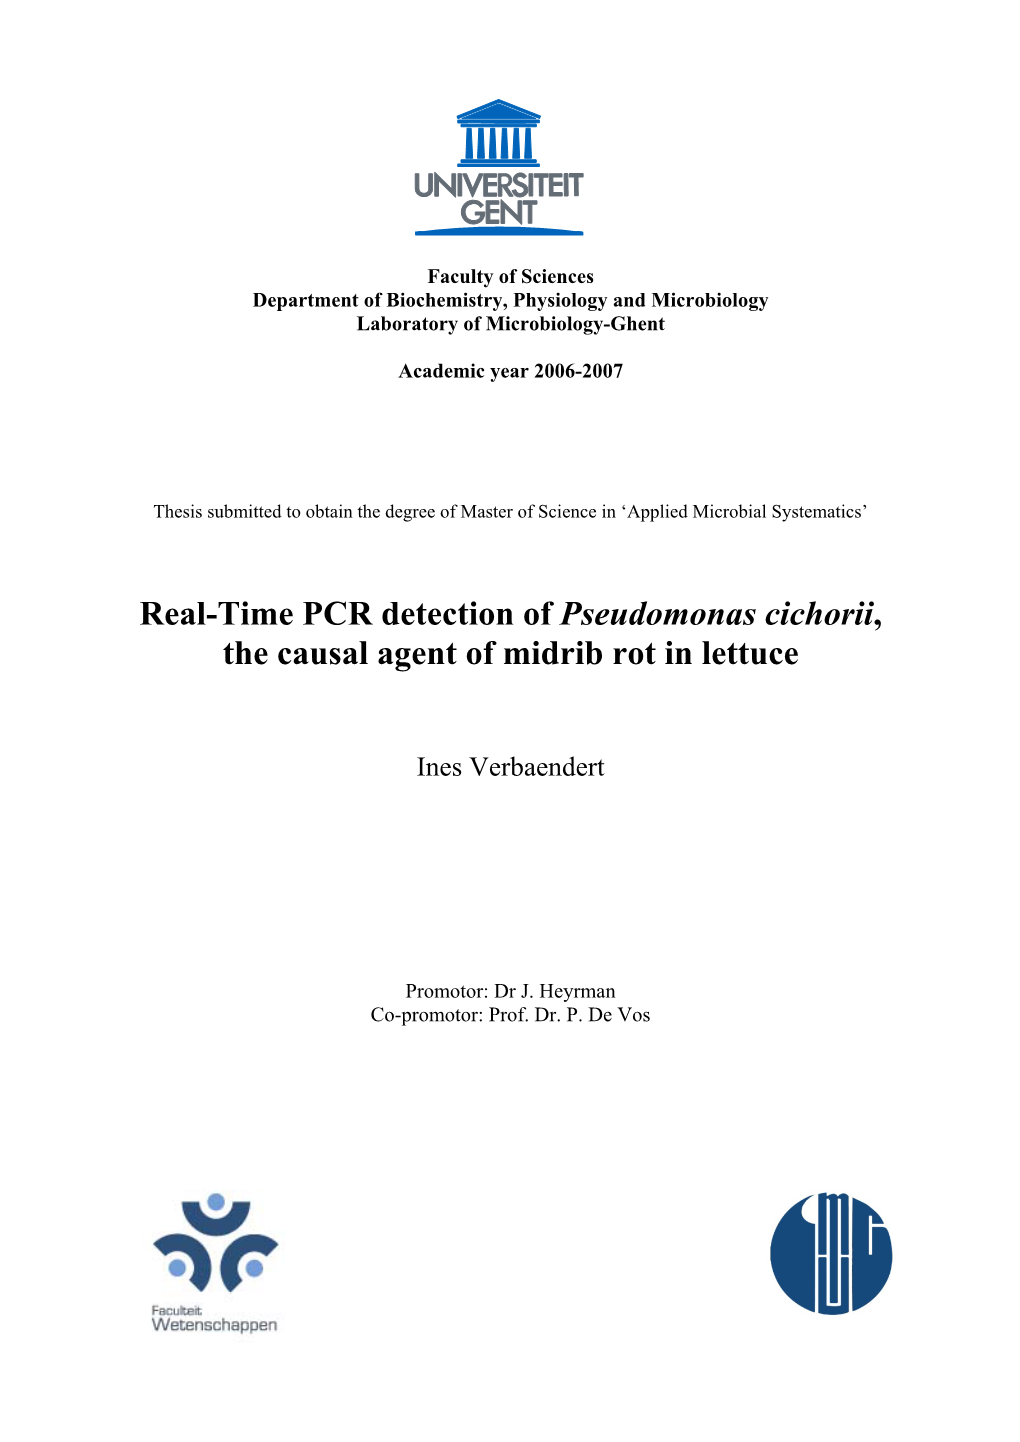 Real-Time PCR Detection of Pseudomonas Cichorii, the Causal Agent of Midrib Rot in Lettuce